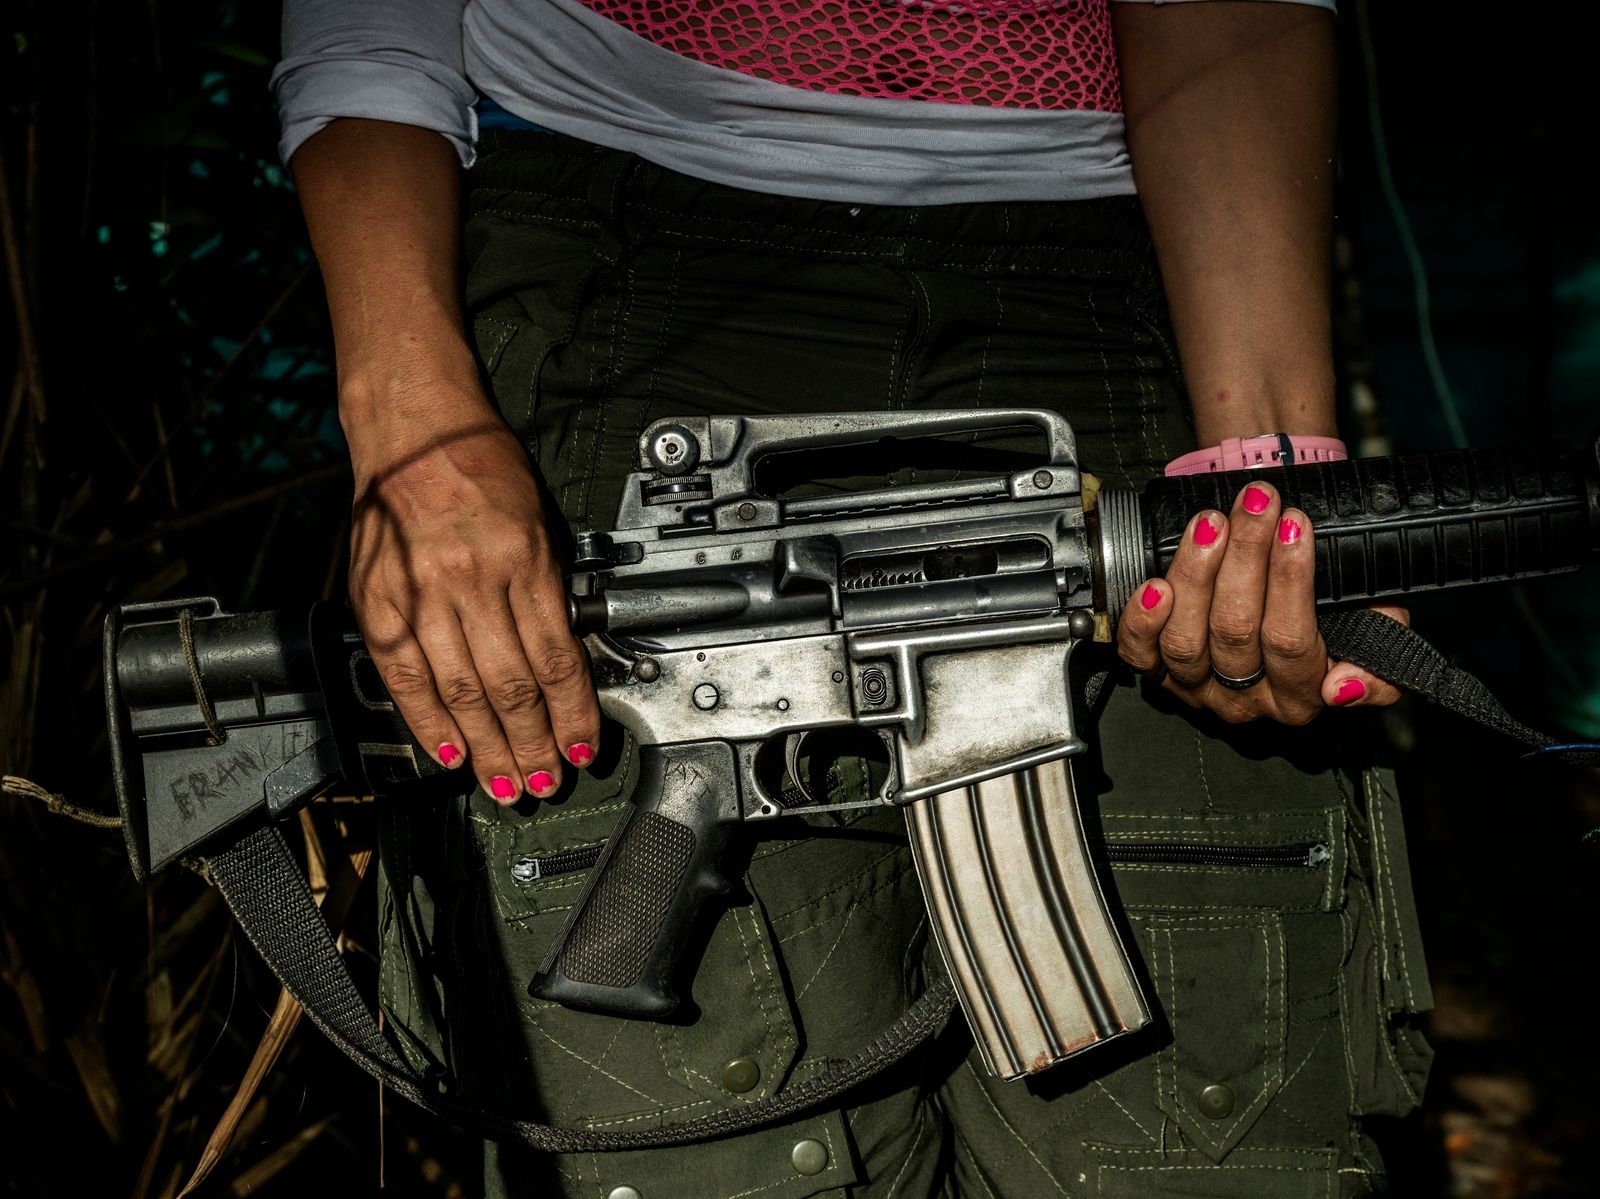 © Mads Nissen - Image from the Hope over Fear - Colombia's struggle for peace photography project